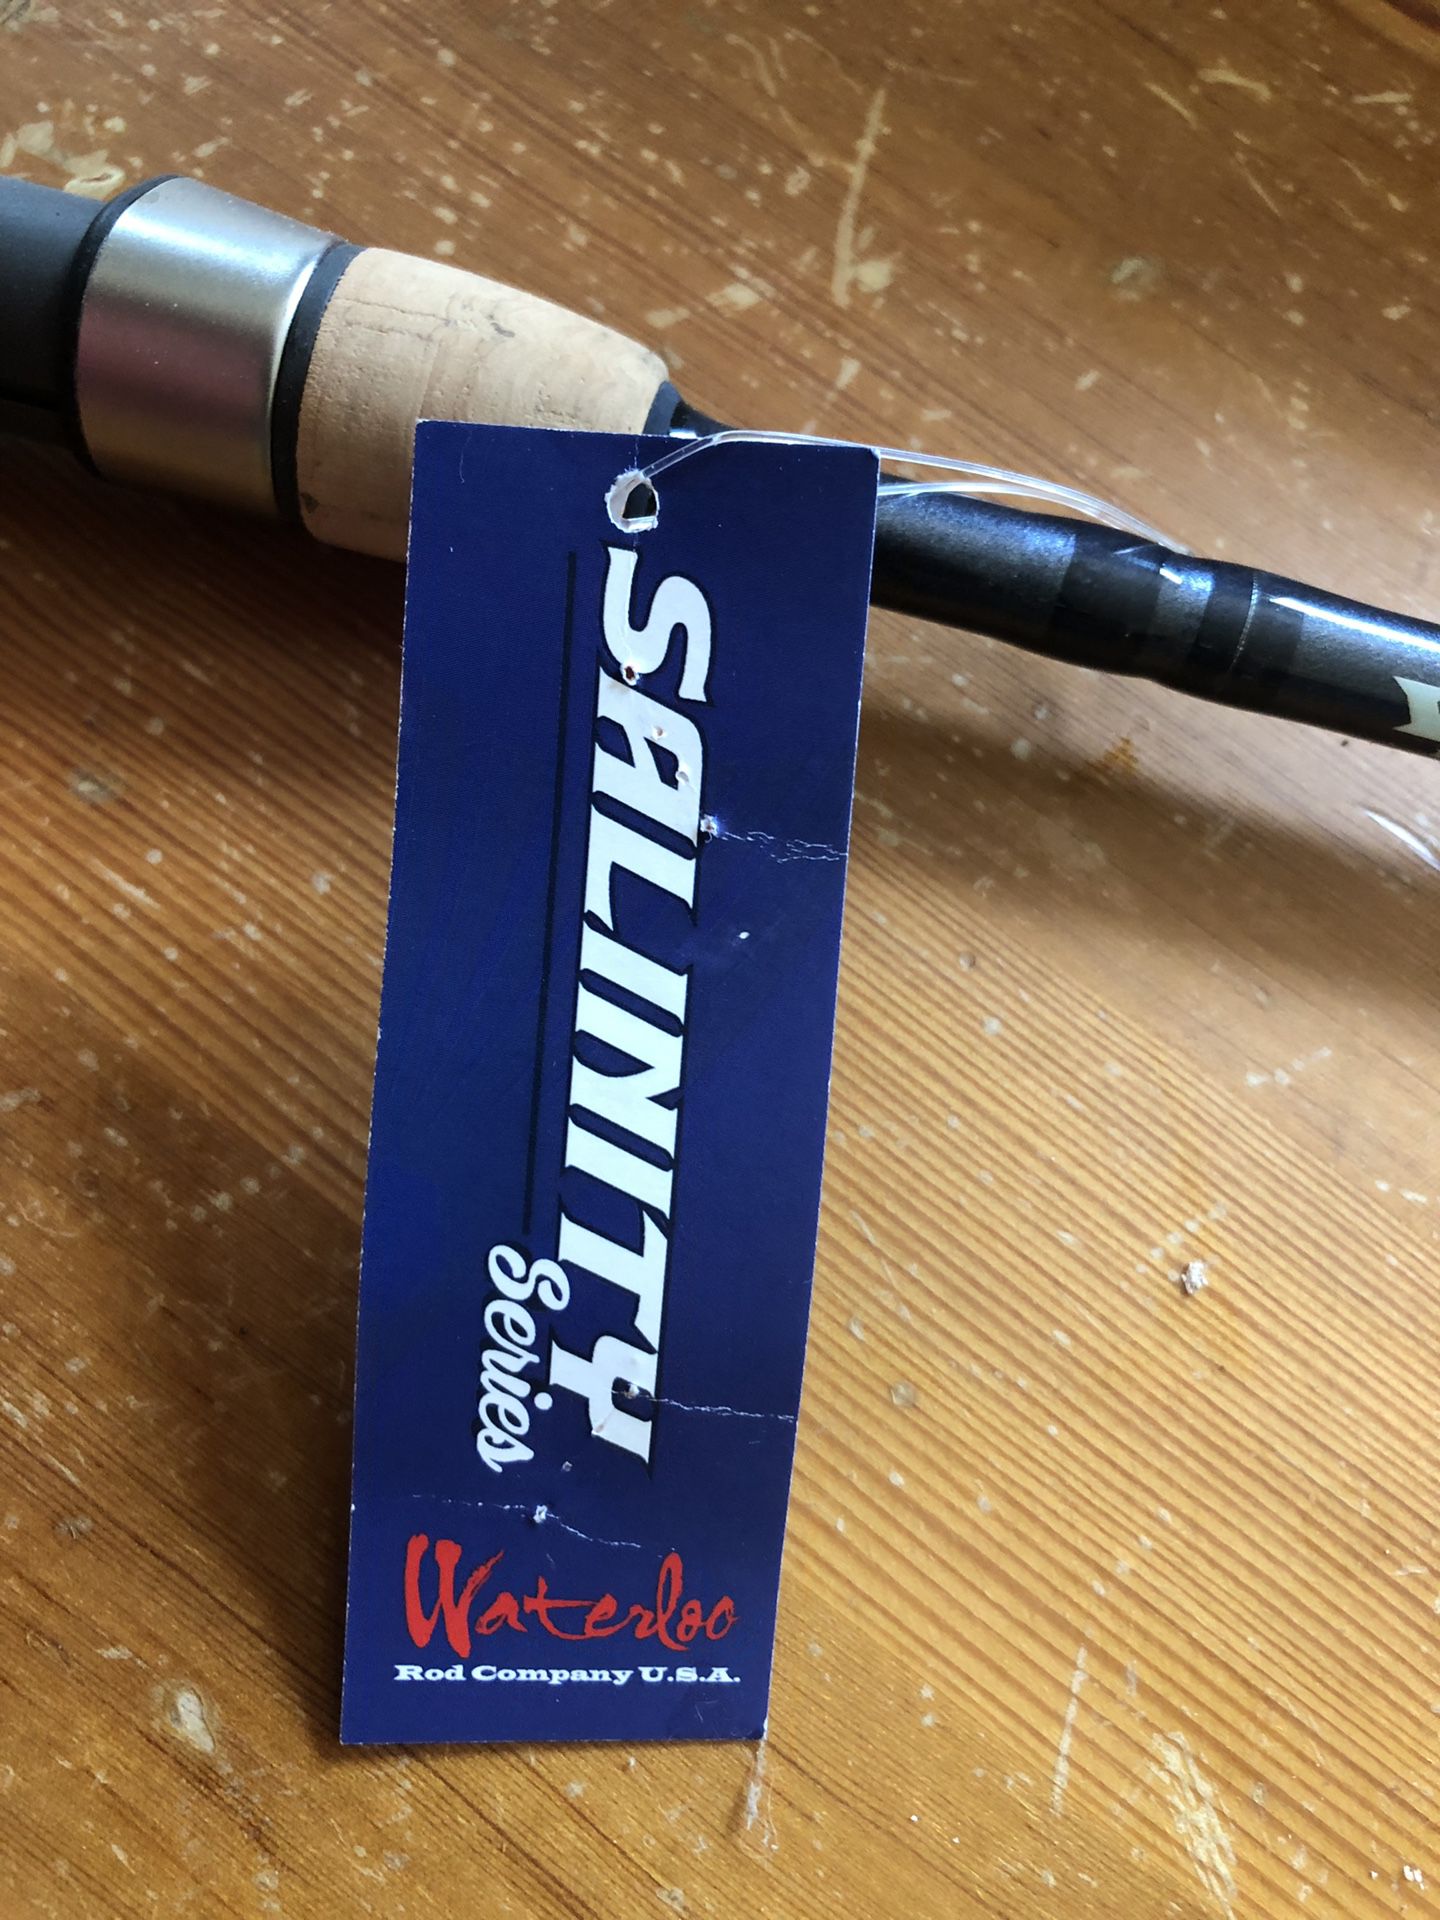 Salinity Series Waterloo 7’ 6” Fishing Rod for Sale in Tomball, TX - OfferUp